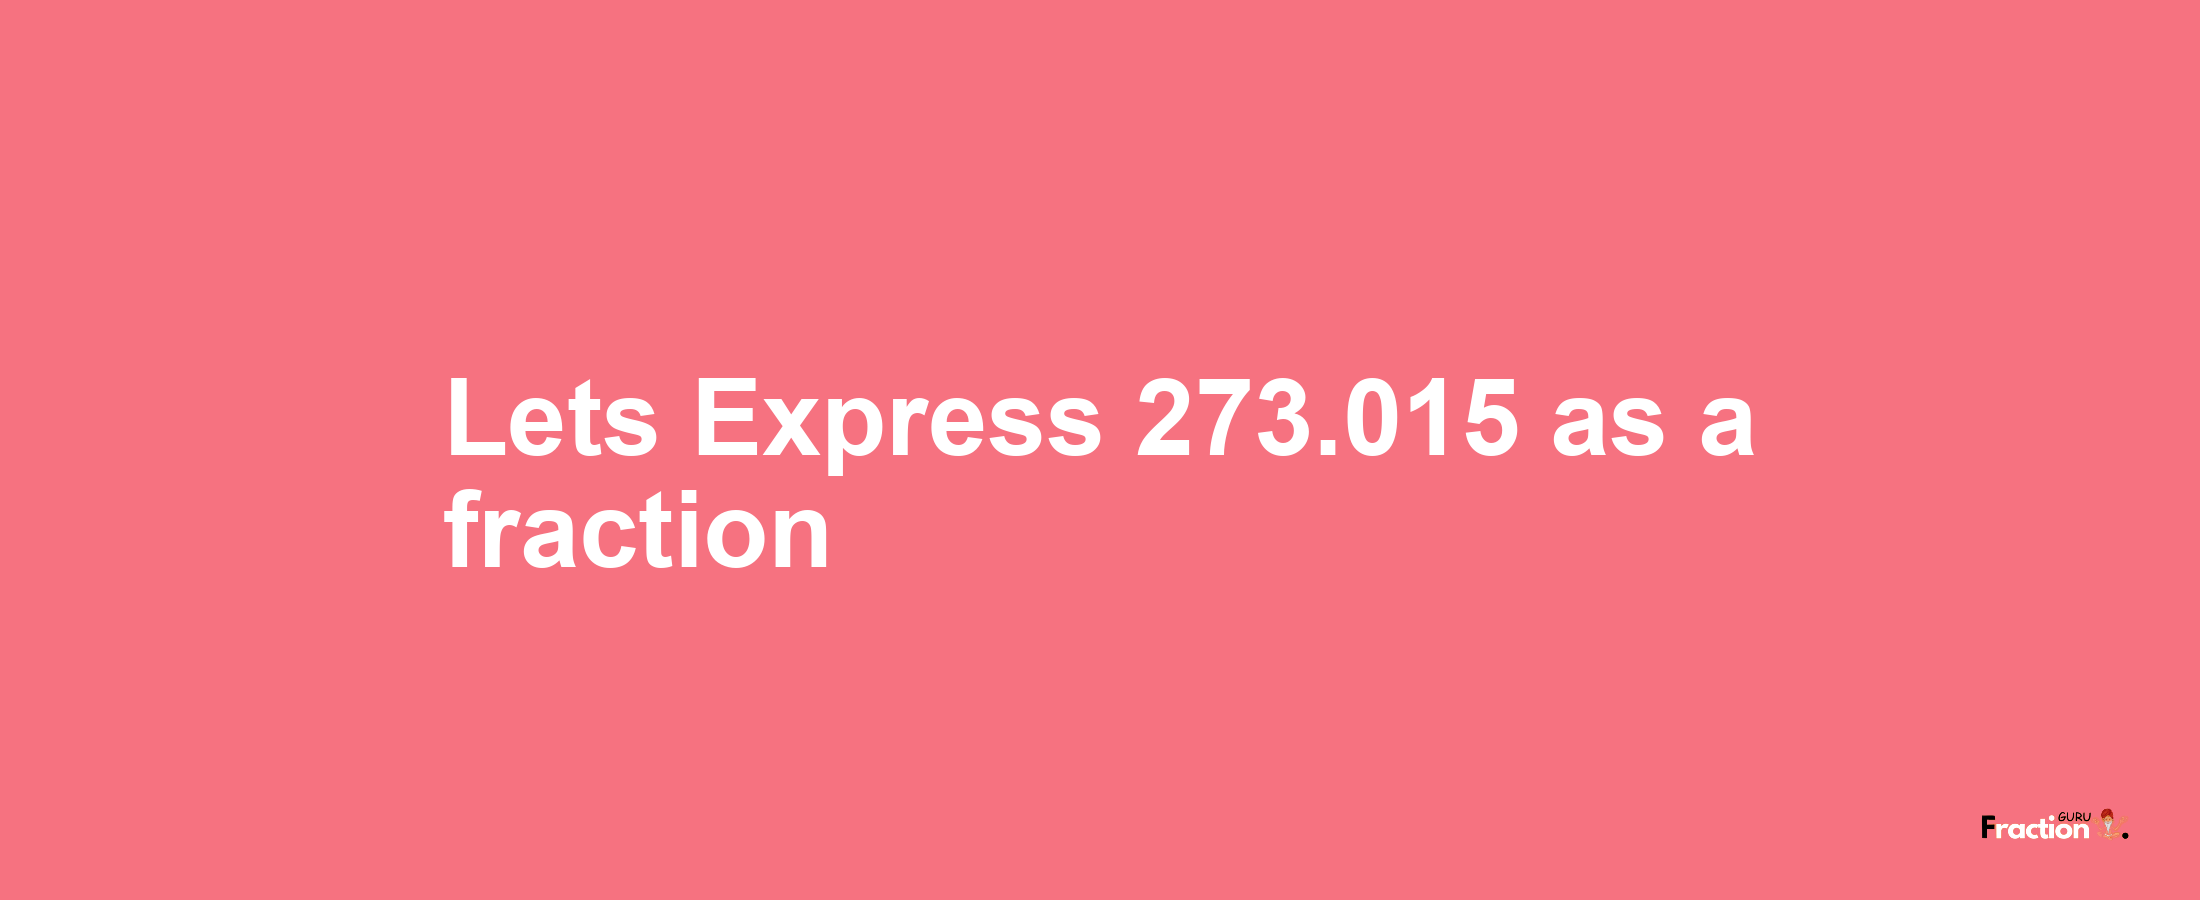 Lets Express 273.015 as afraction